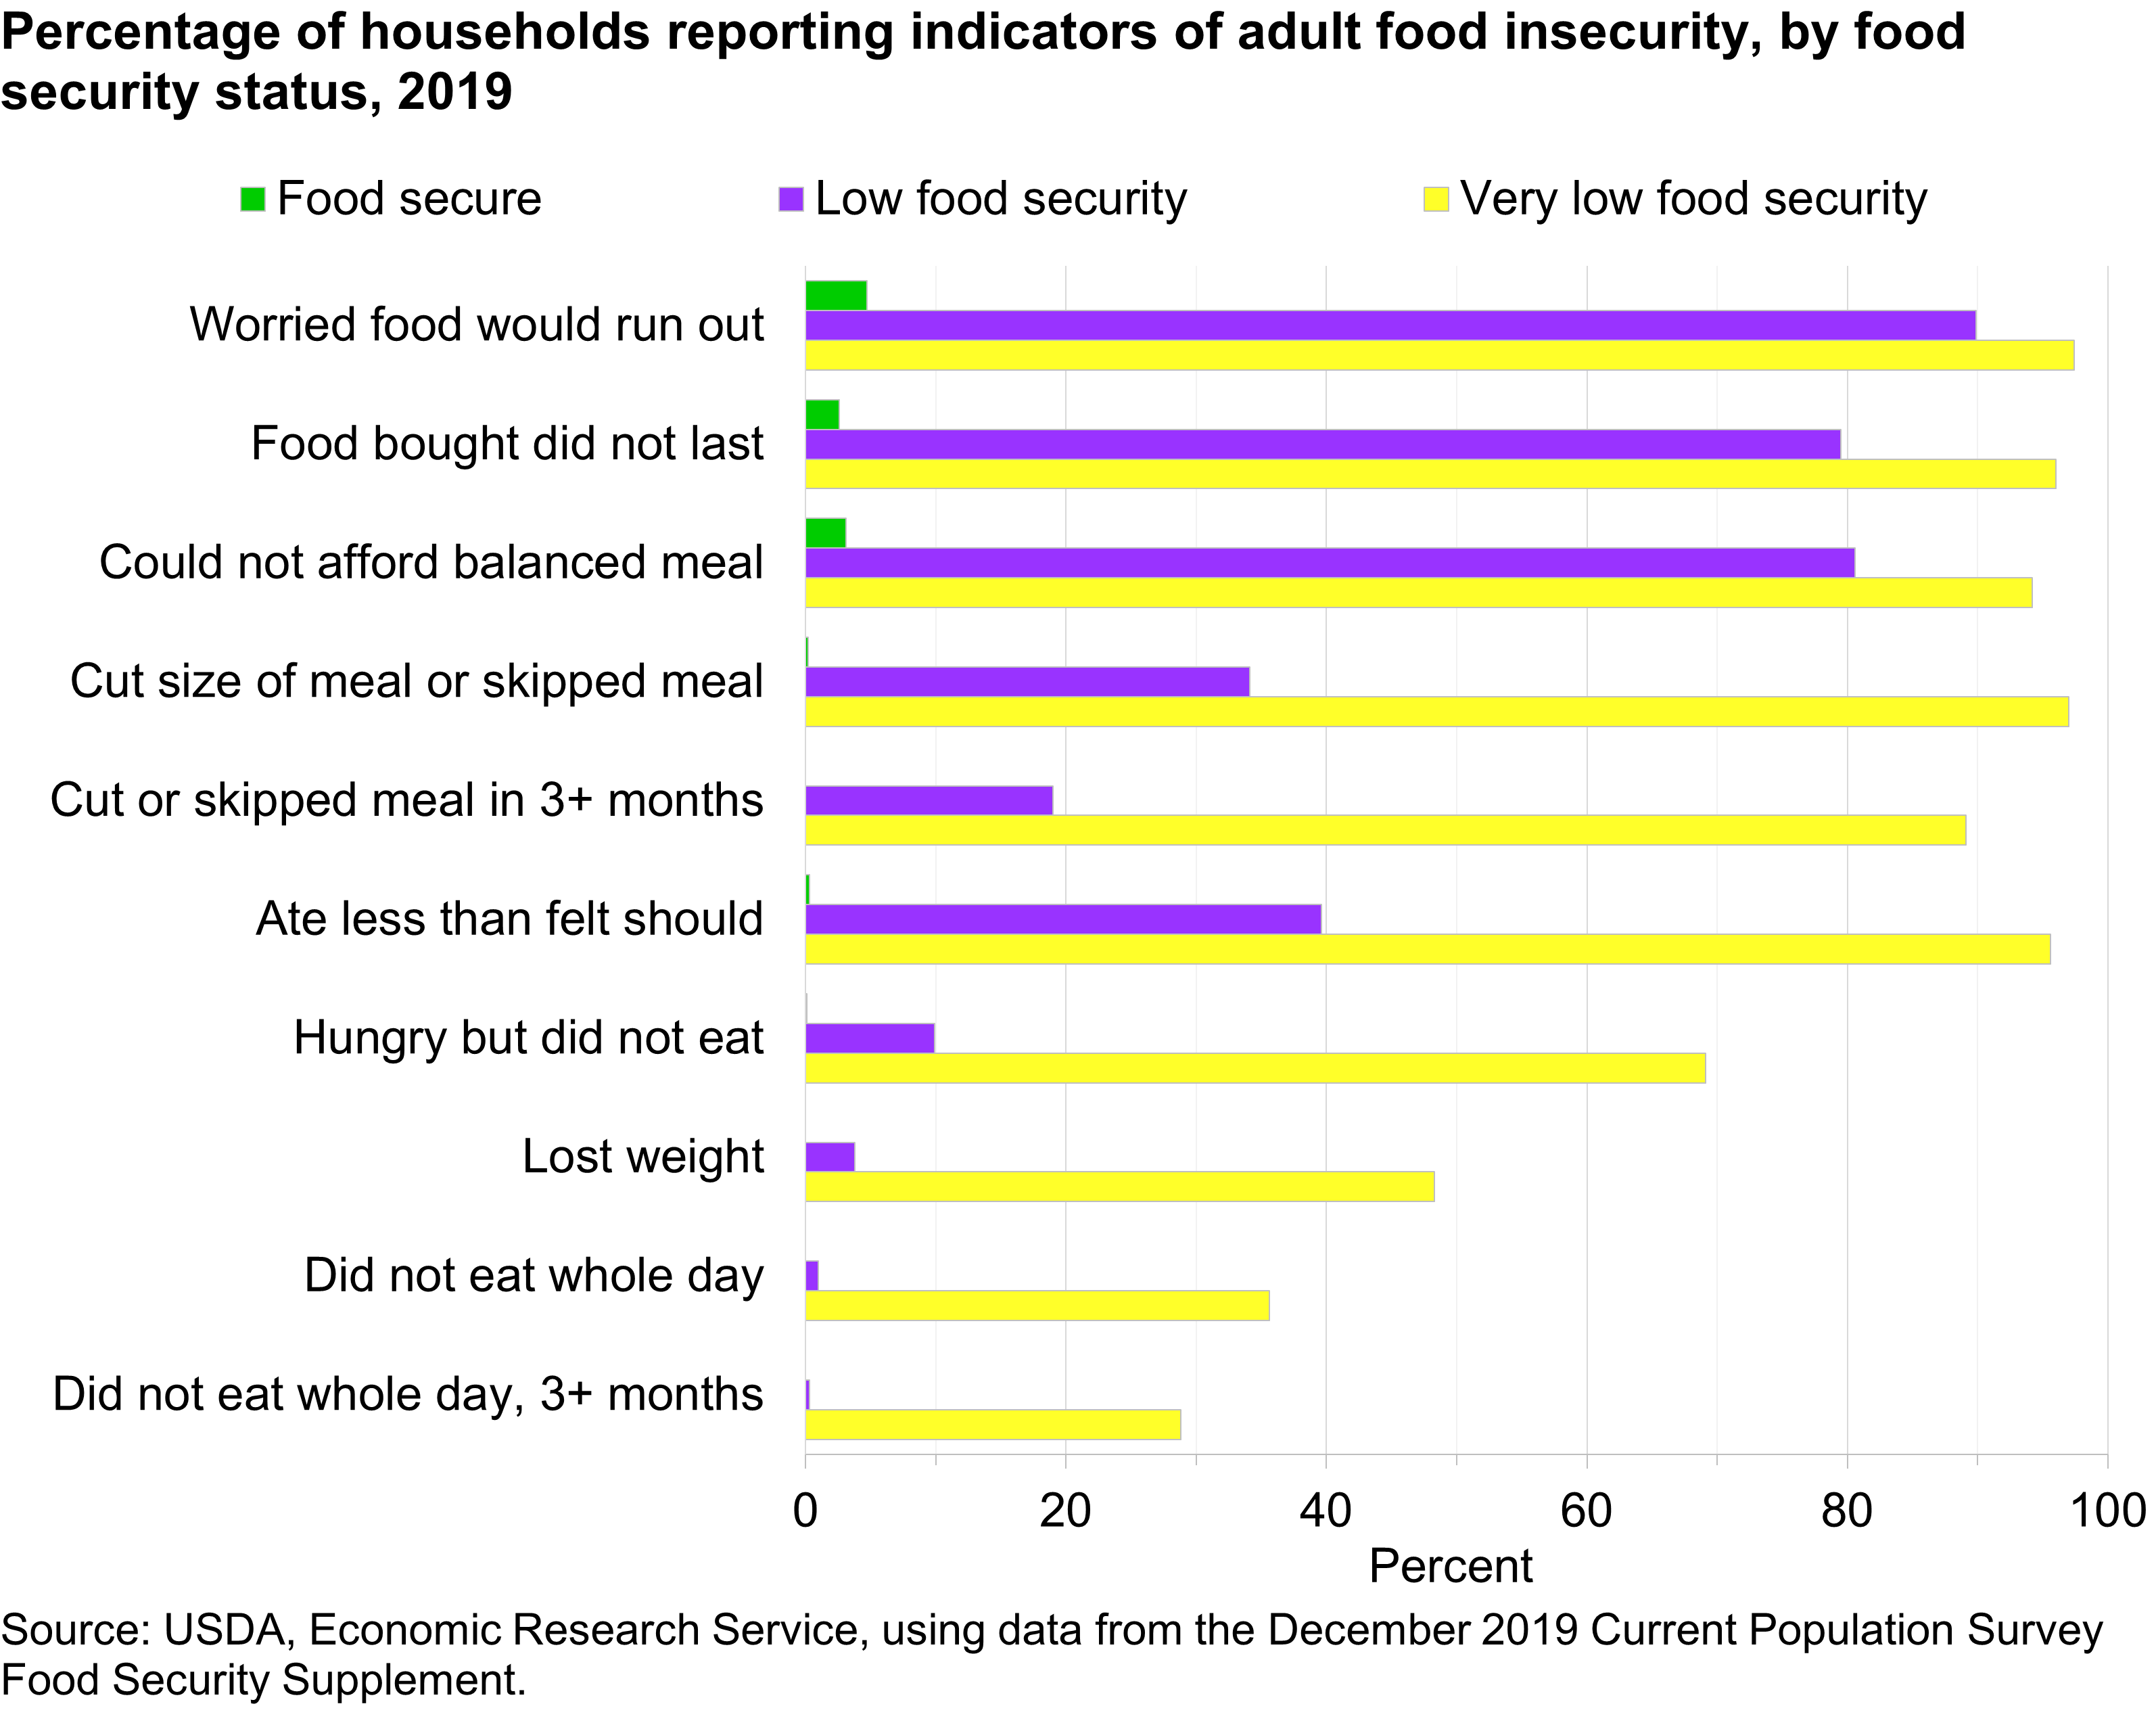 Line graph showing the percentage of households reporting indicators of adult food insecurity. December 2020